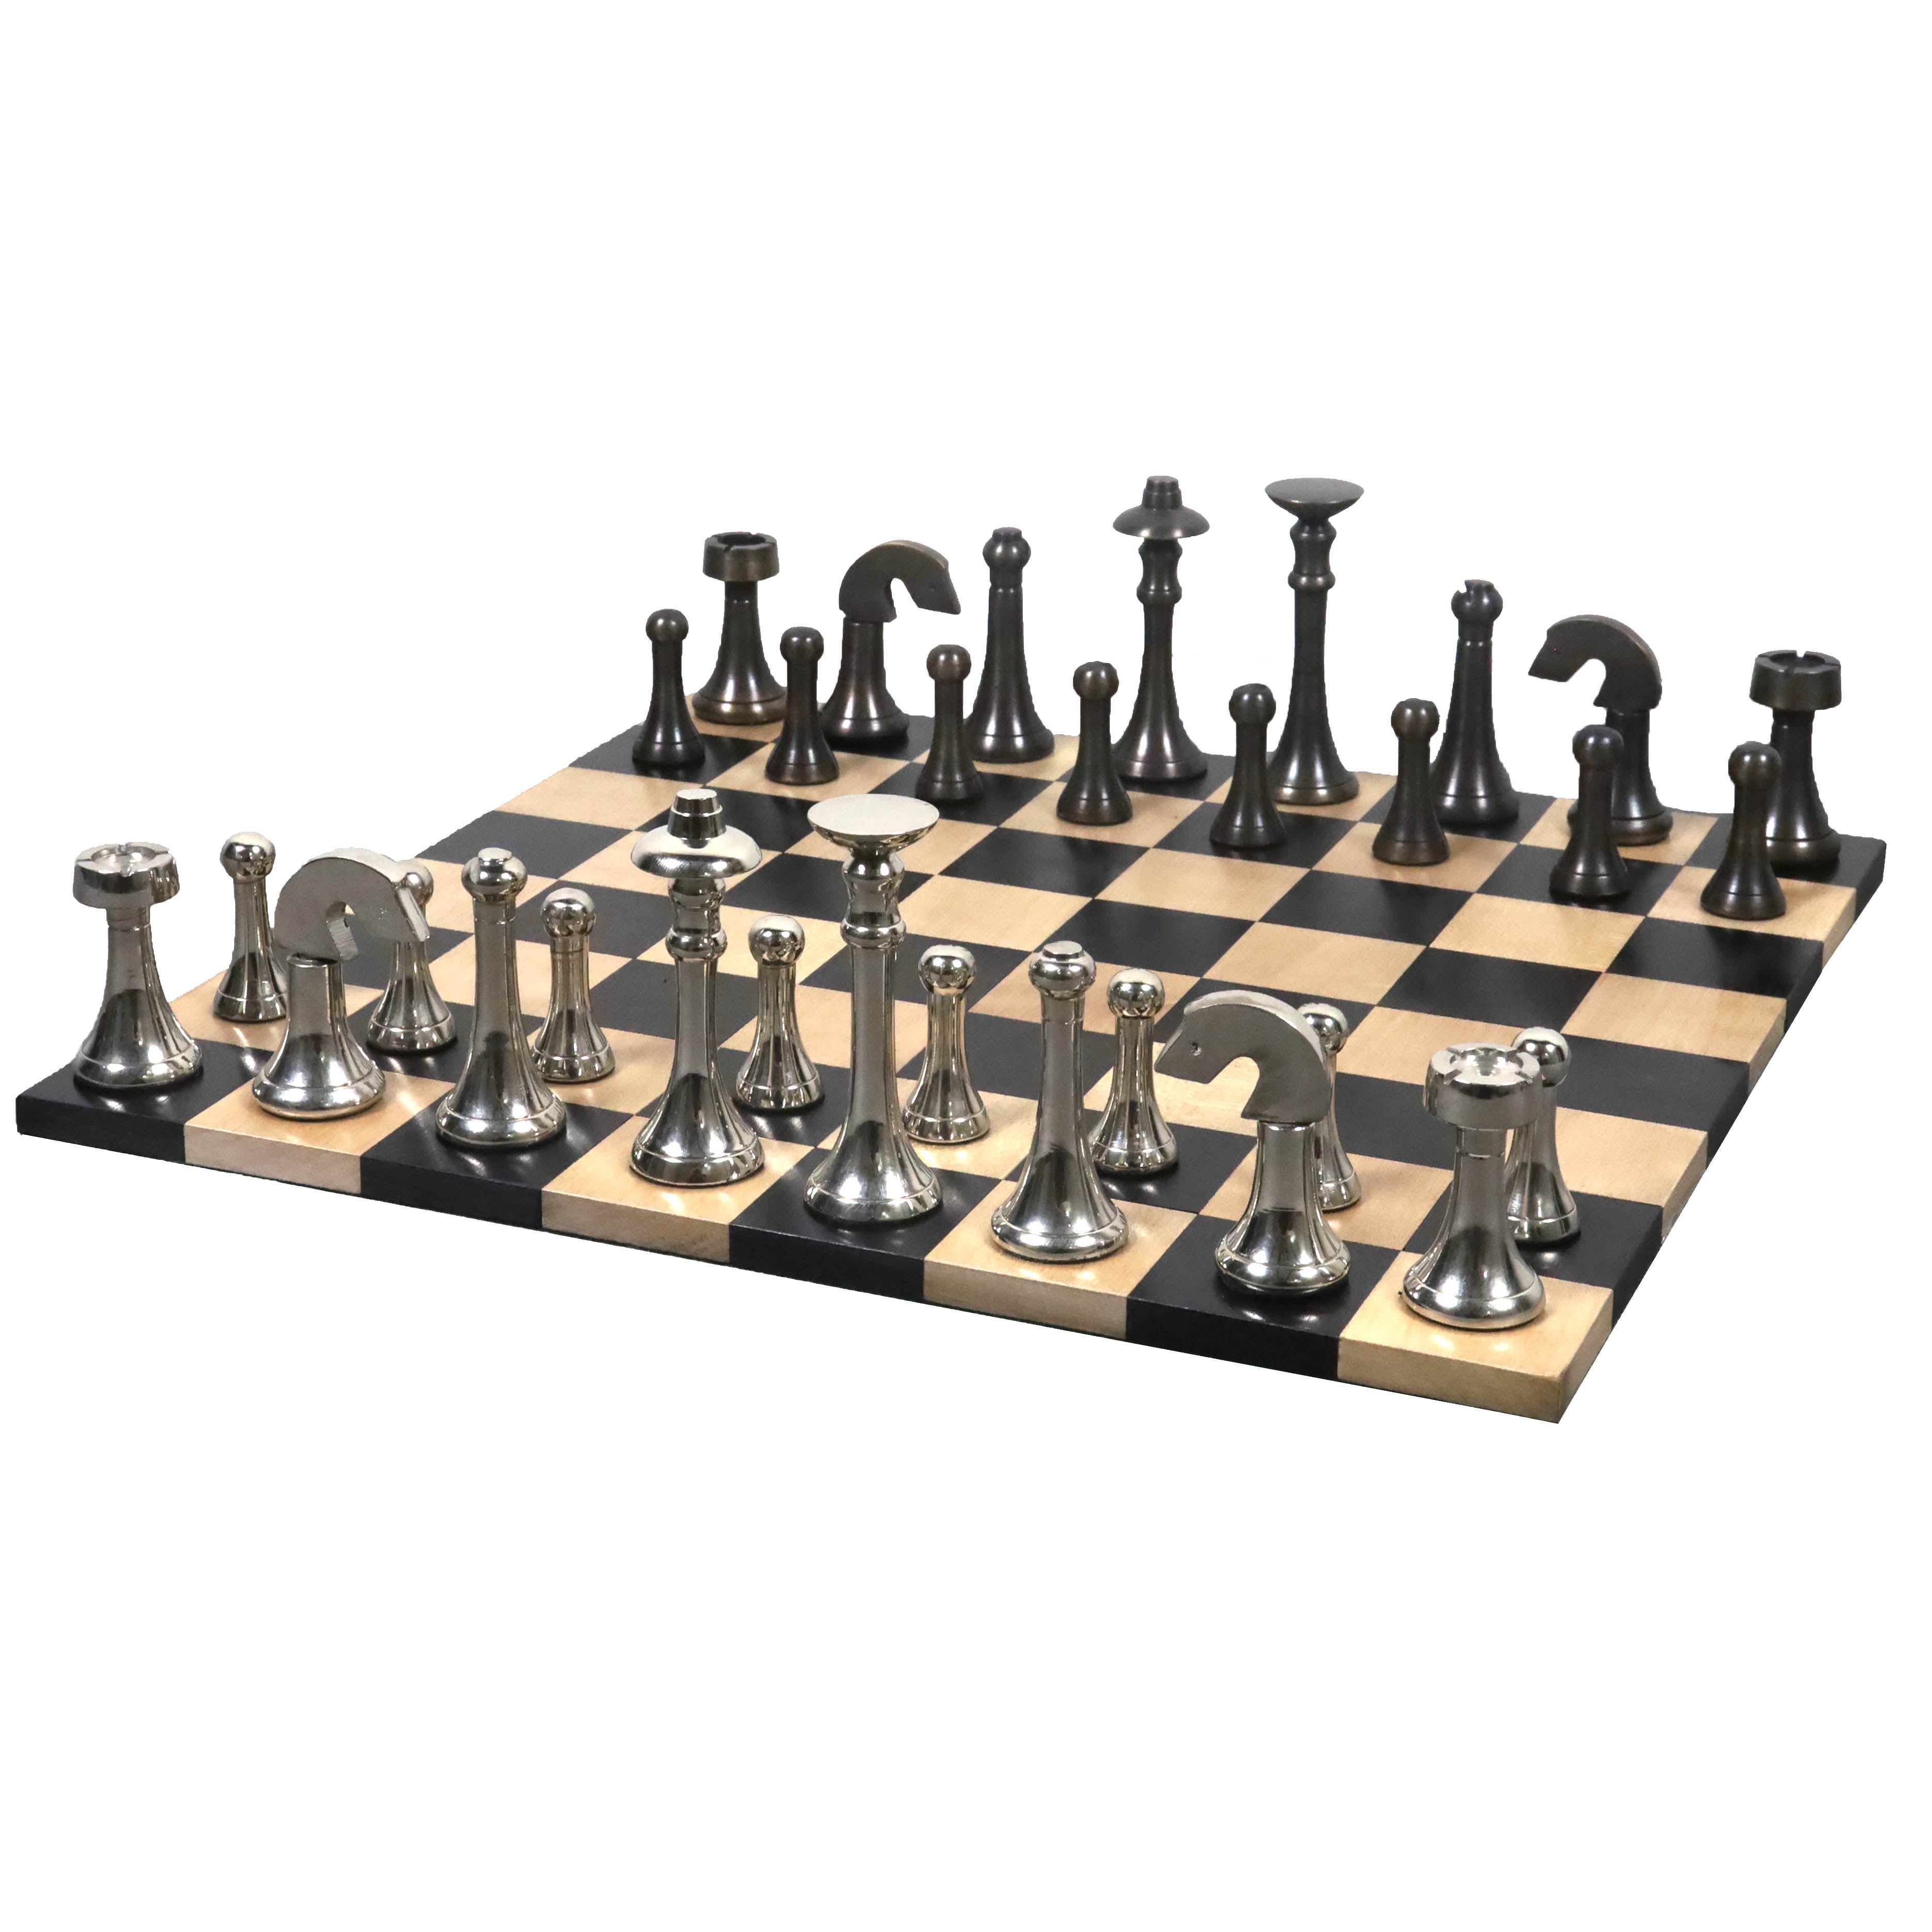 Premium Photo  Golden king chess is last standing in the chess board